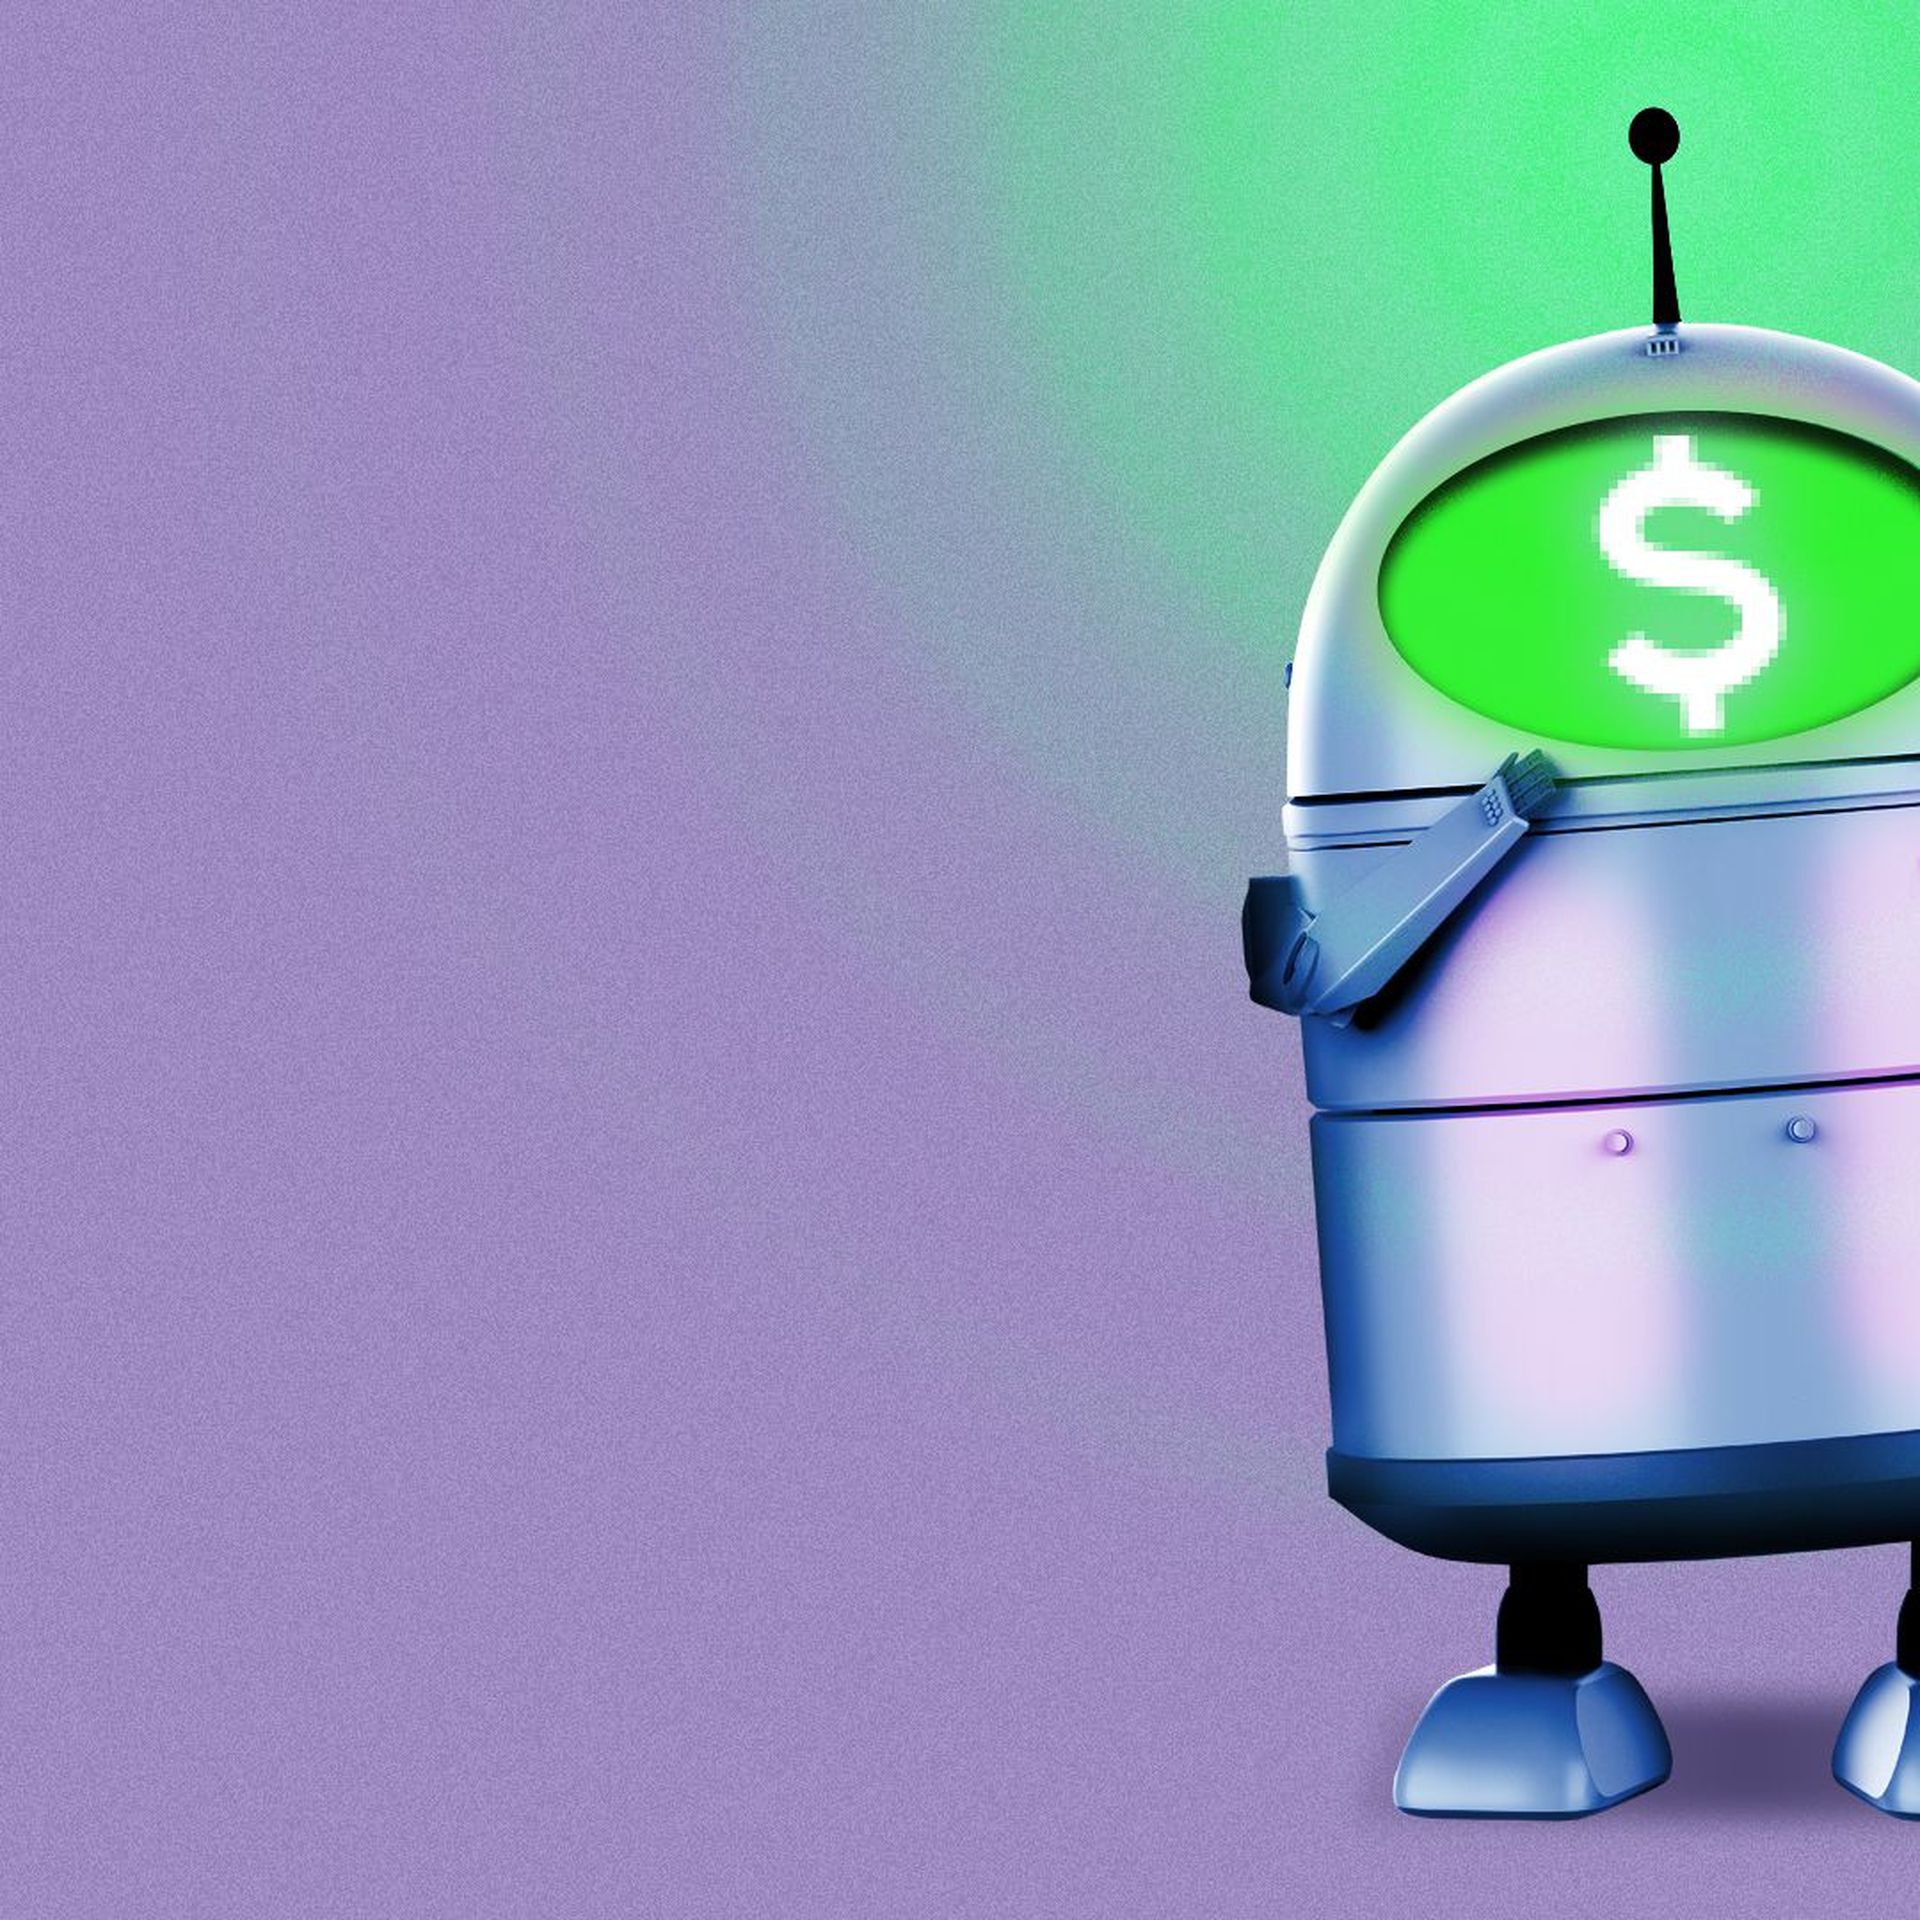 Illustration of a robot with a dollar sign screen on its face